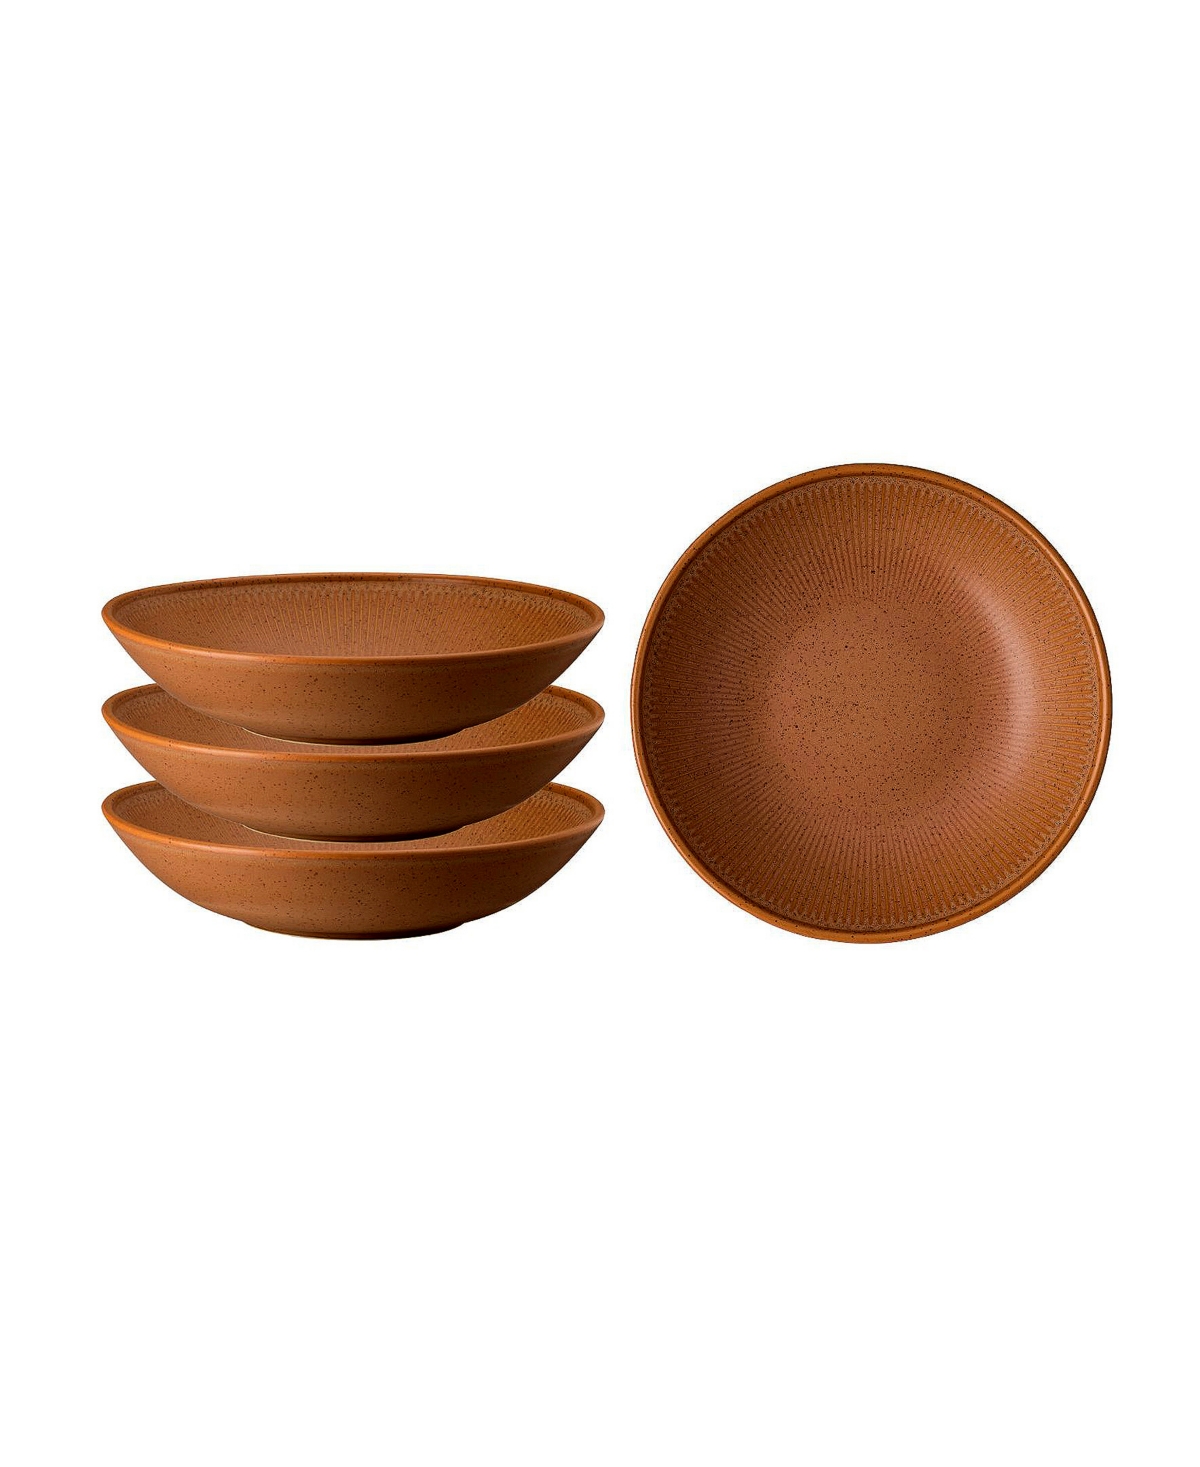 Clay Set of 4 Soup Plates, Service for 4 - Earth